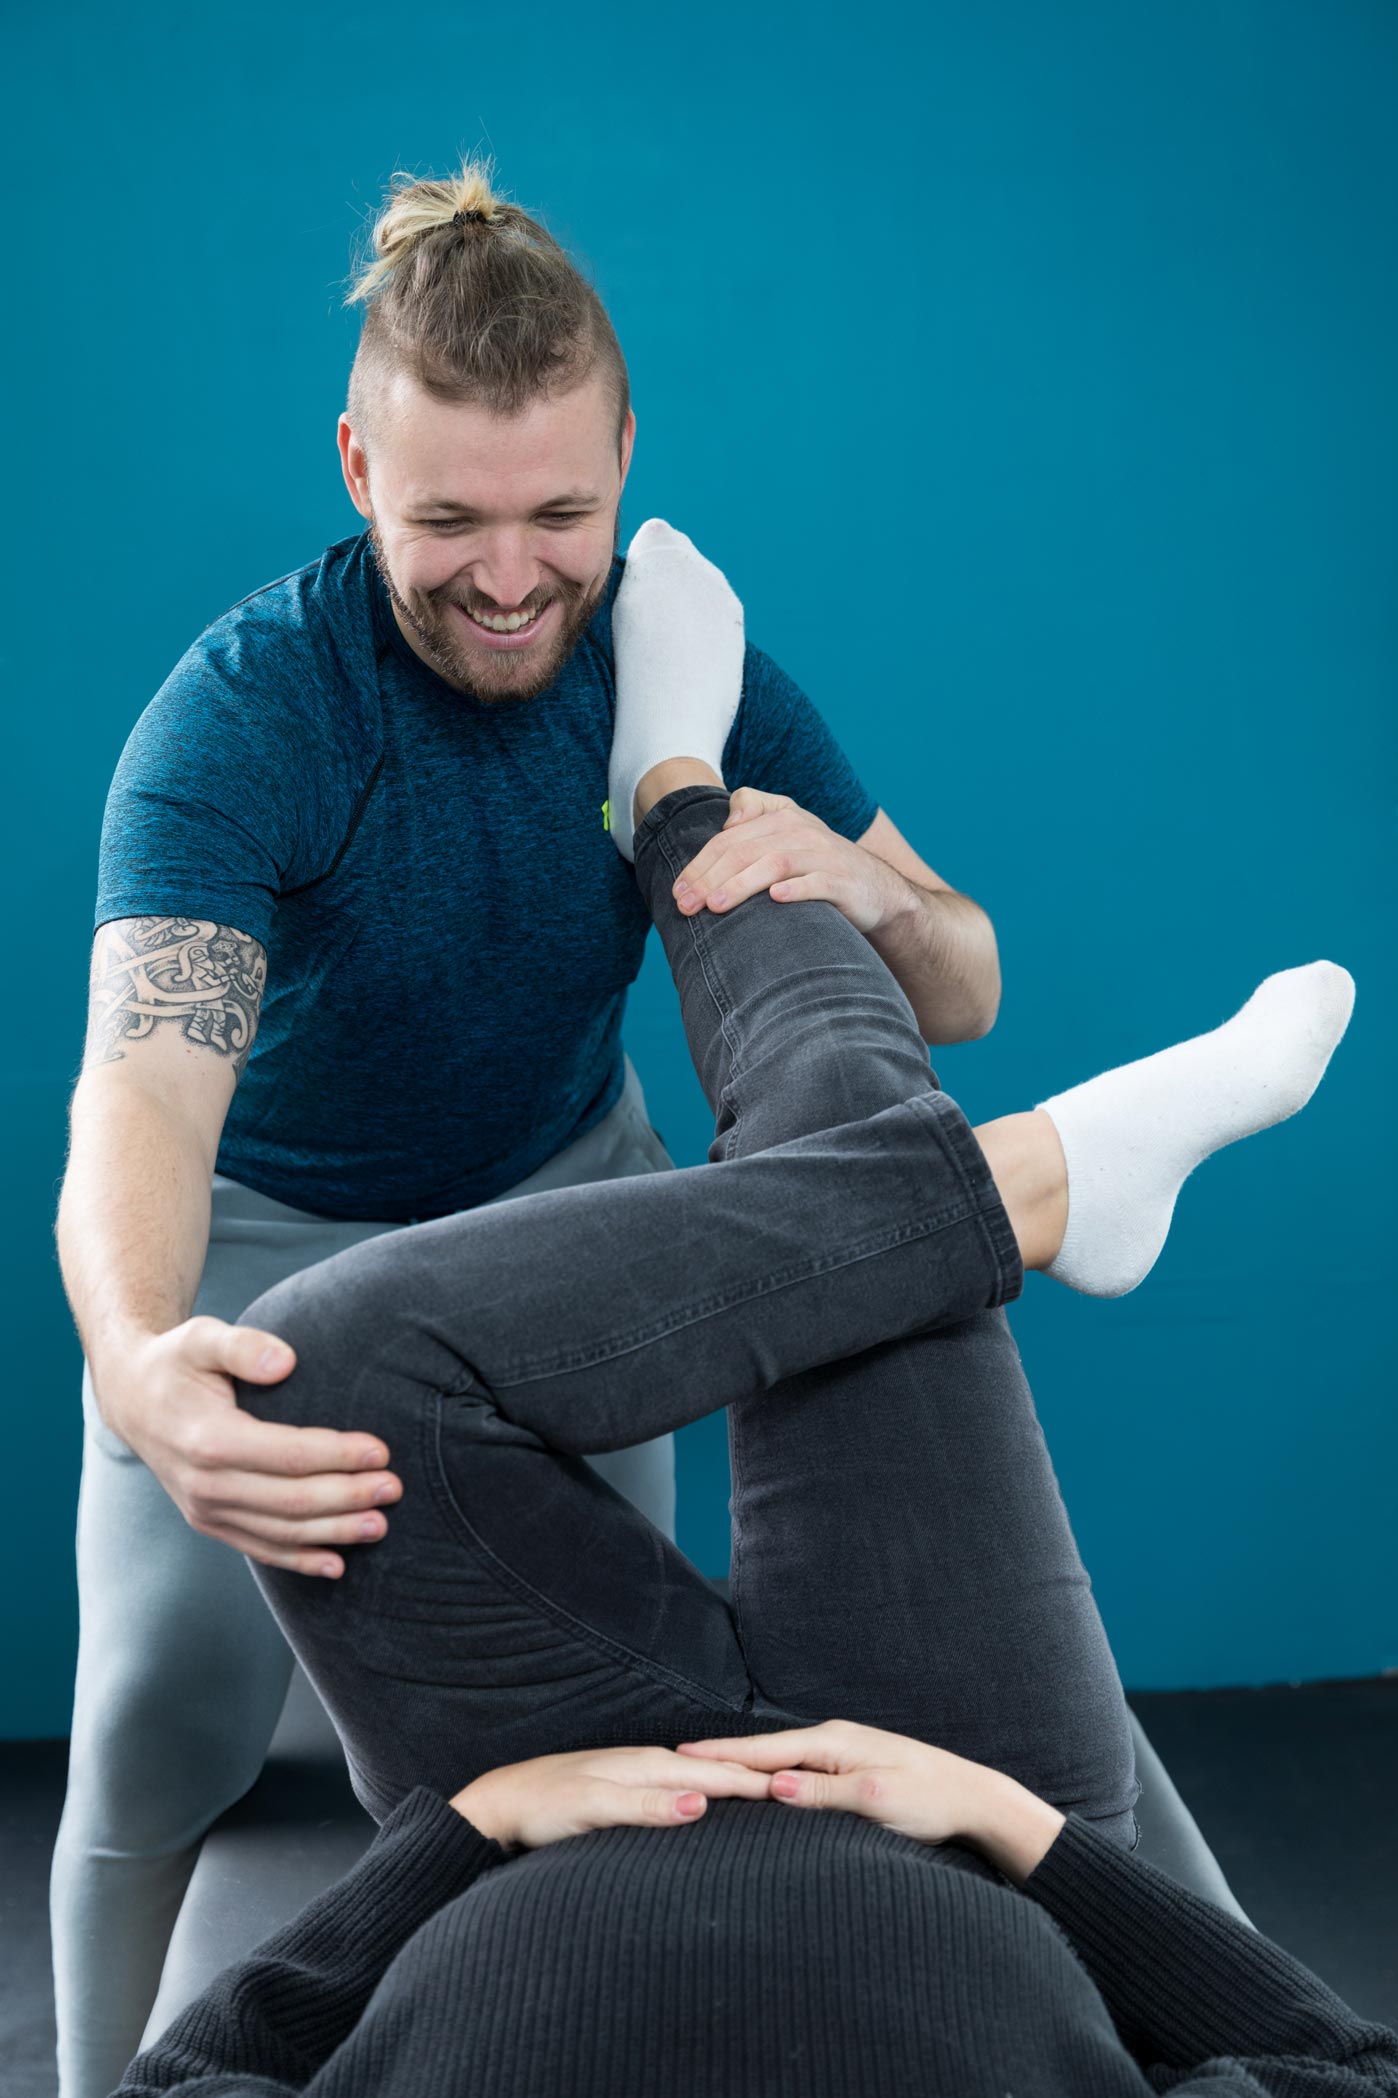 A male stretchologist stretches a client as part of a health & fitness personal branding photography shoot in Croydon, London